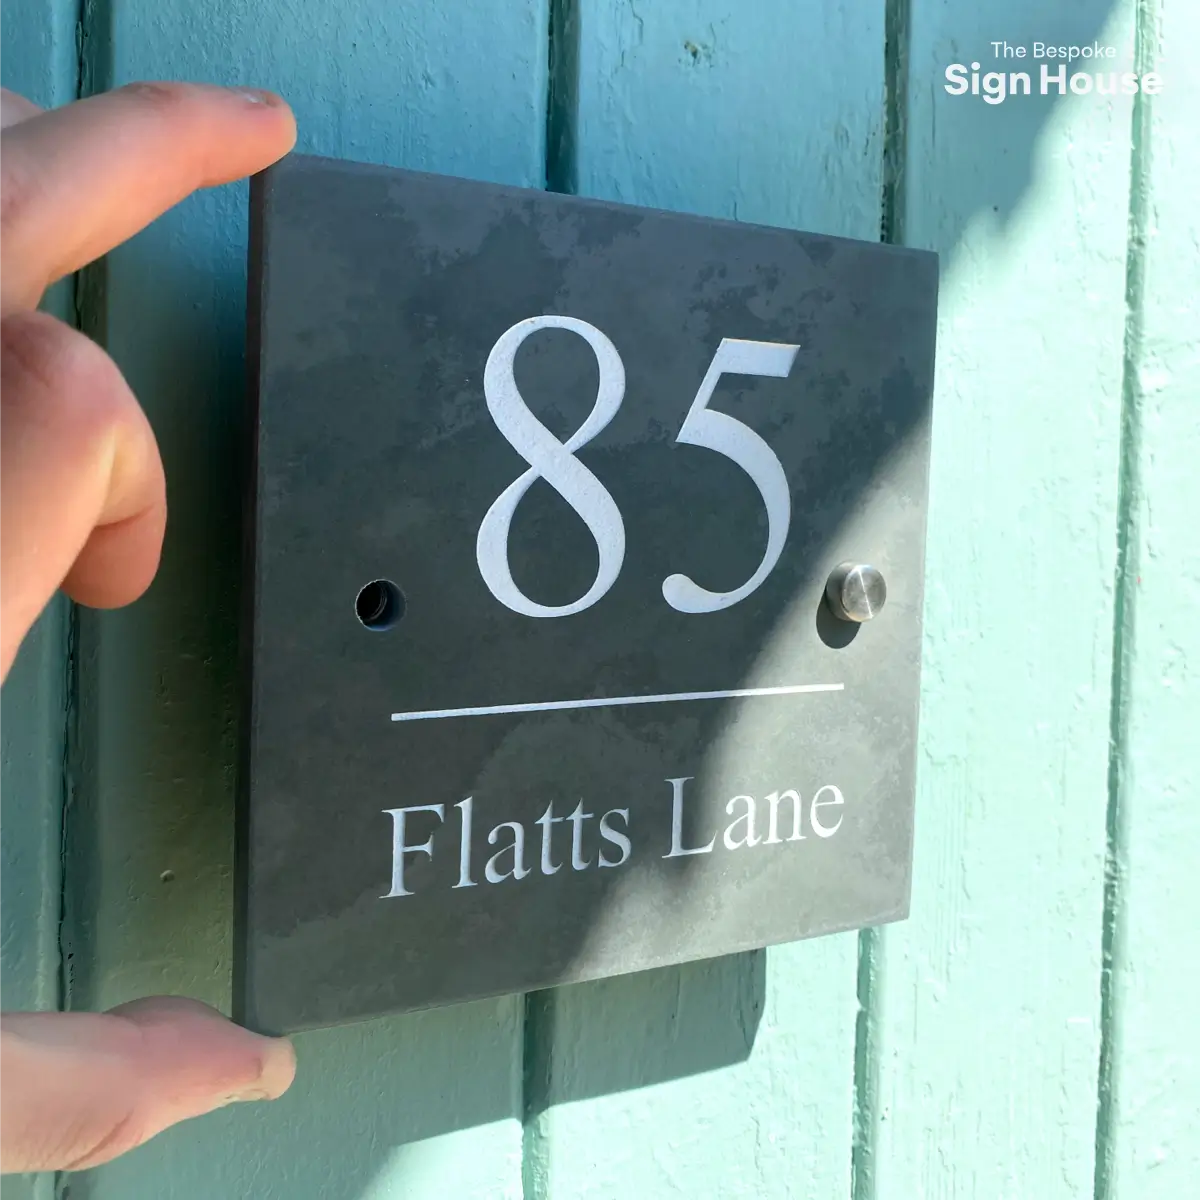 A person is installing a slate house sign that reads "85 Flatts Lane" onto a light blue wooden wall. The sign is being held in place with one hand while metal standoff caps are being screwed into pre-drilled holes. The text "The Bespoke Sign House" is displayed in the top right corner.